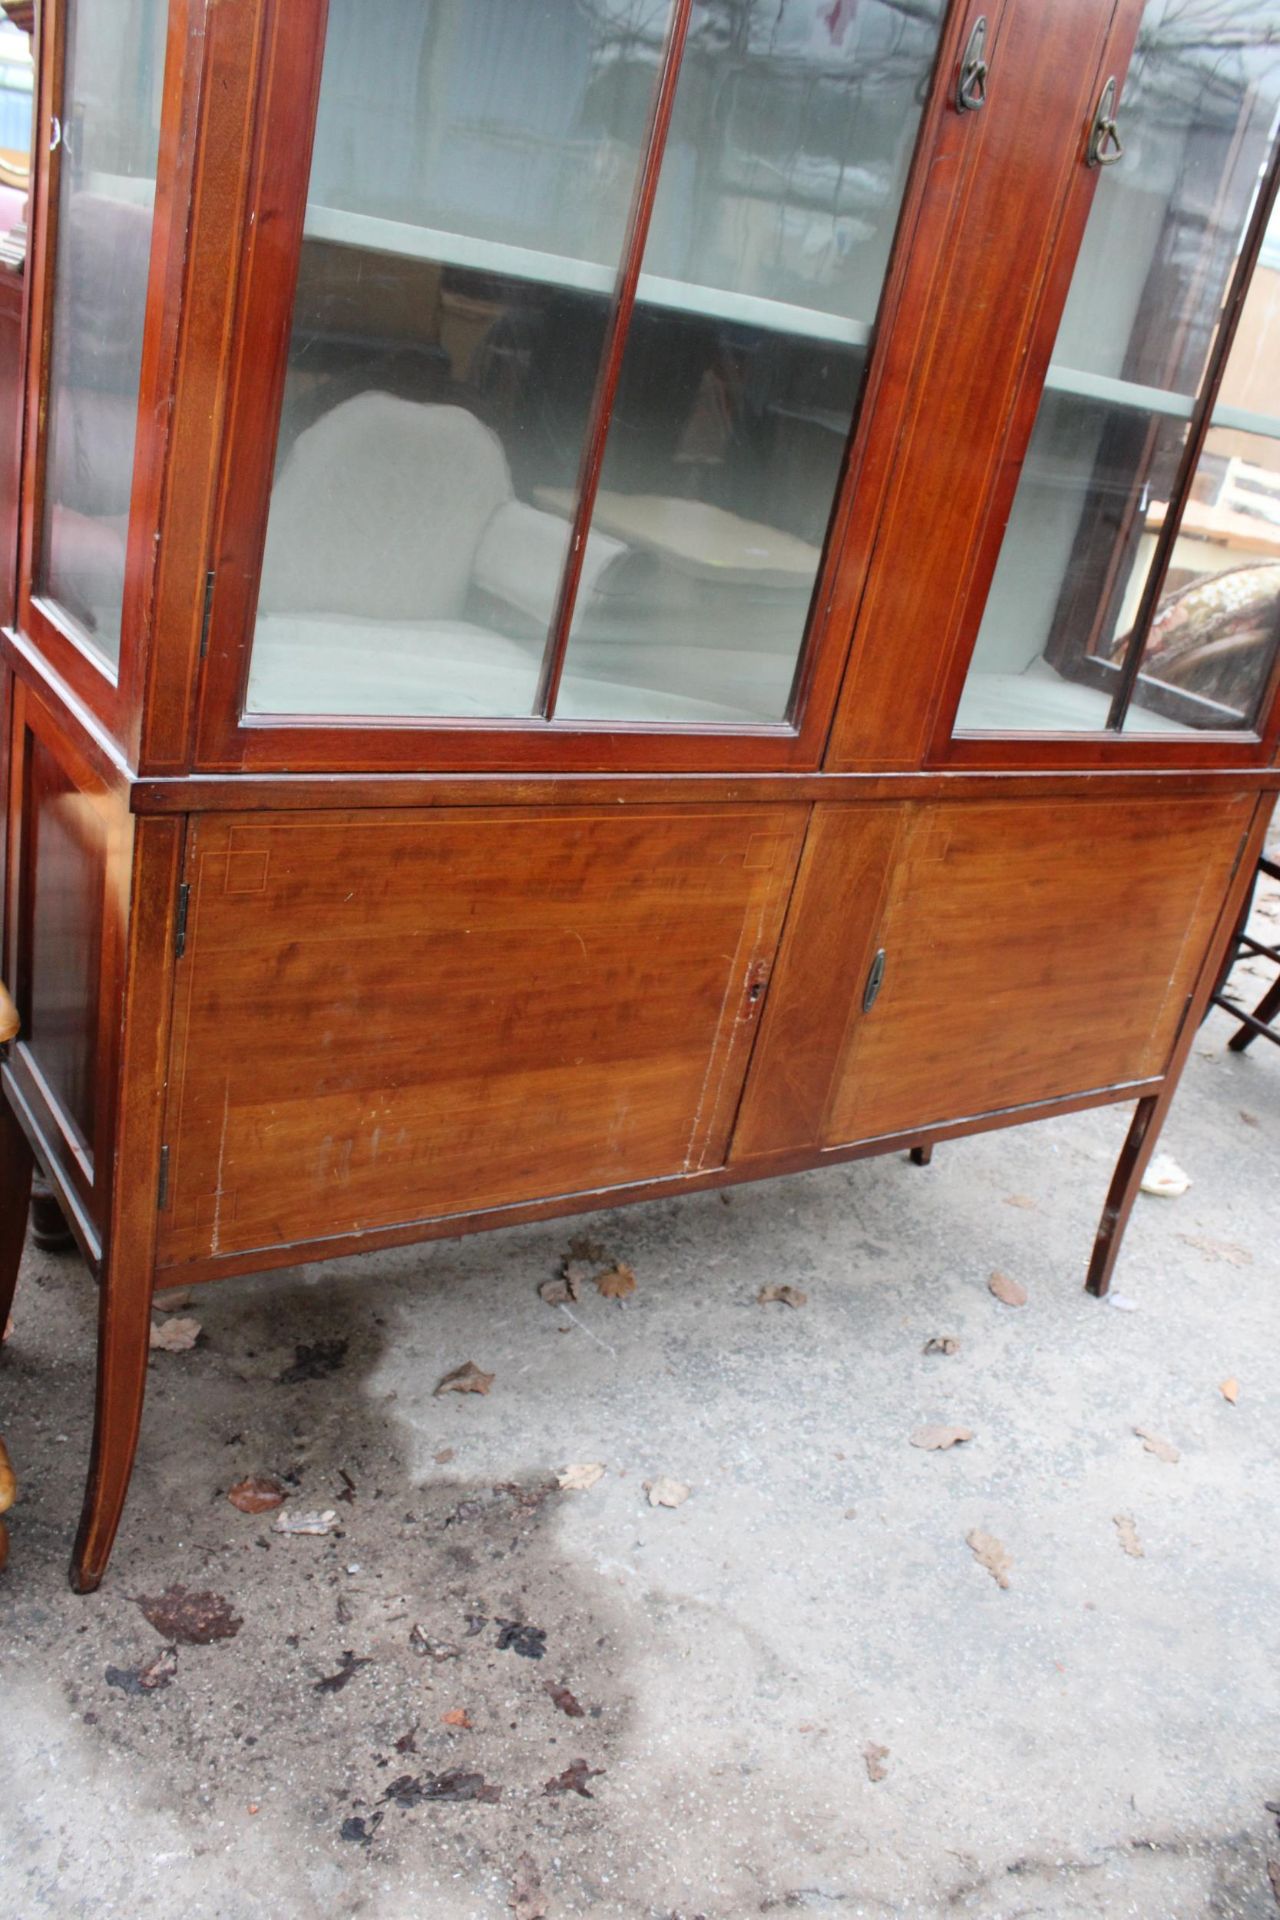 AN EDWARDIAN MAHOGANY AND INLAID TWO DOOR DISPLAY CABINET 51" WIDE - Image 3 of 5